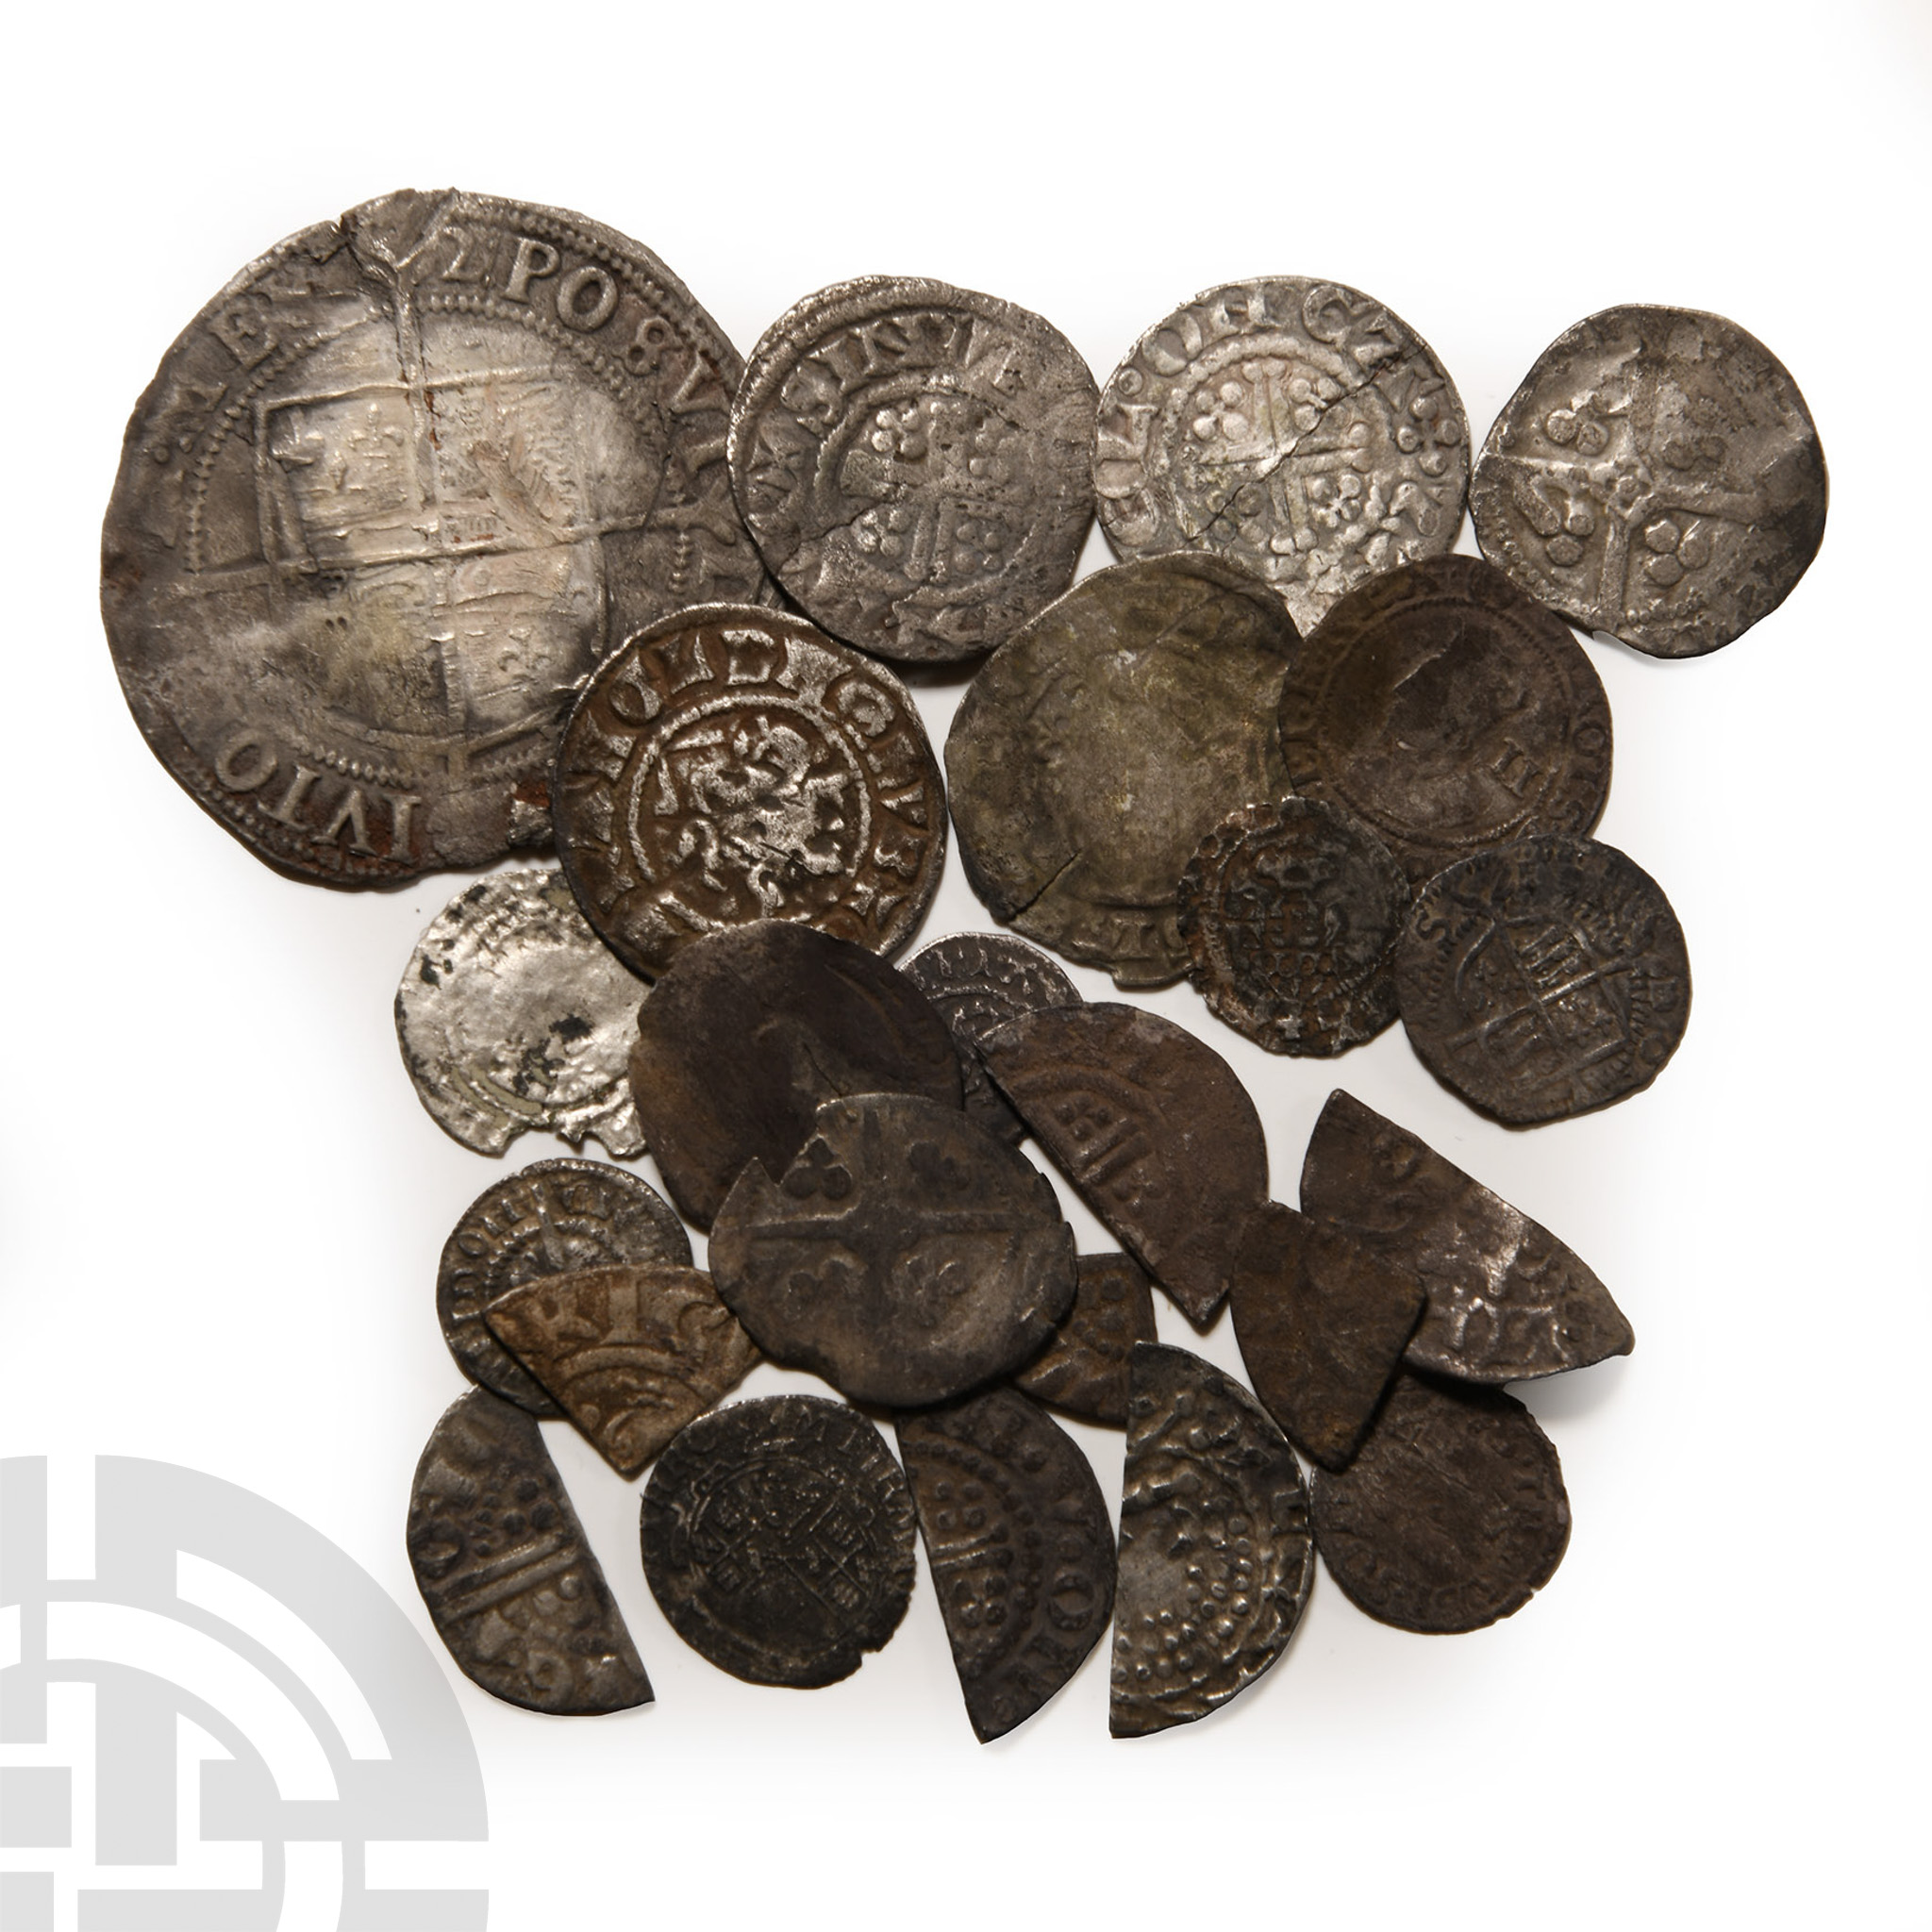 English Medieval Coins - and Later AR Coin Group [24]